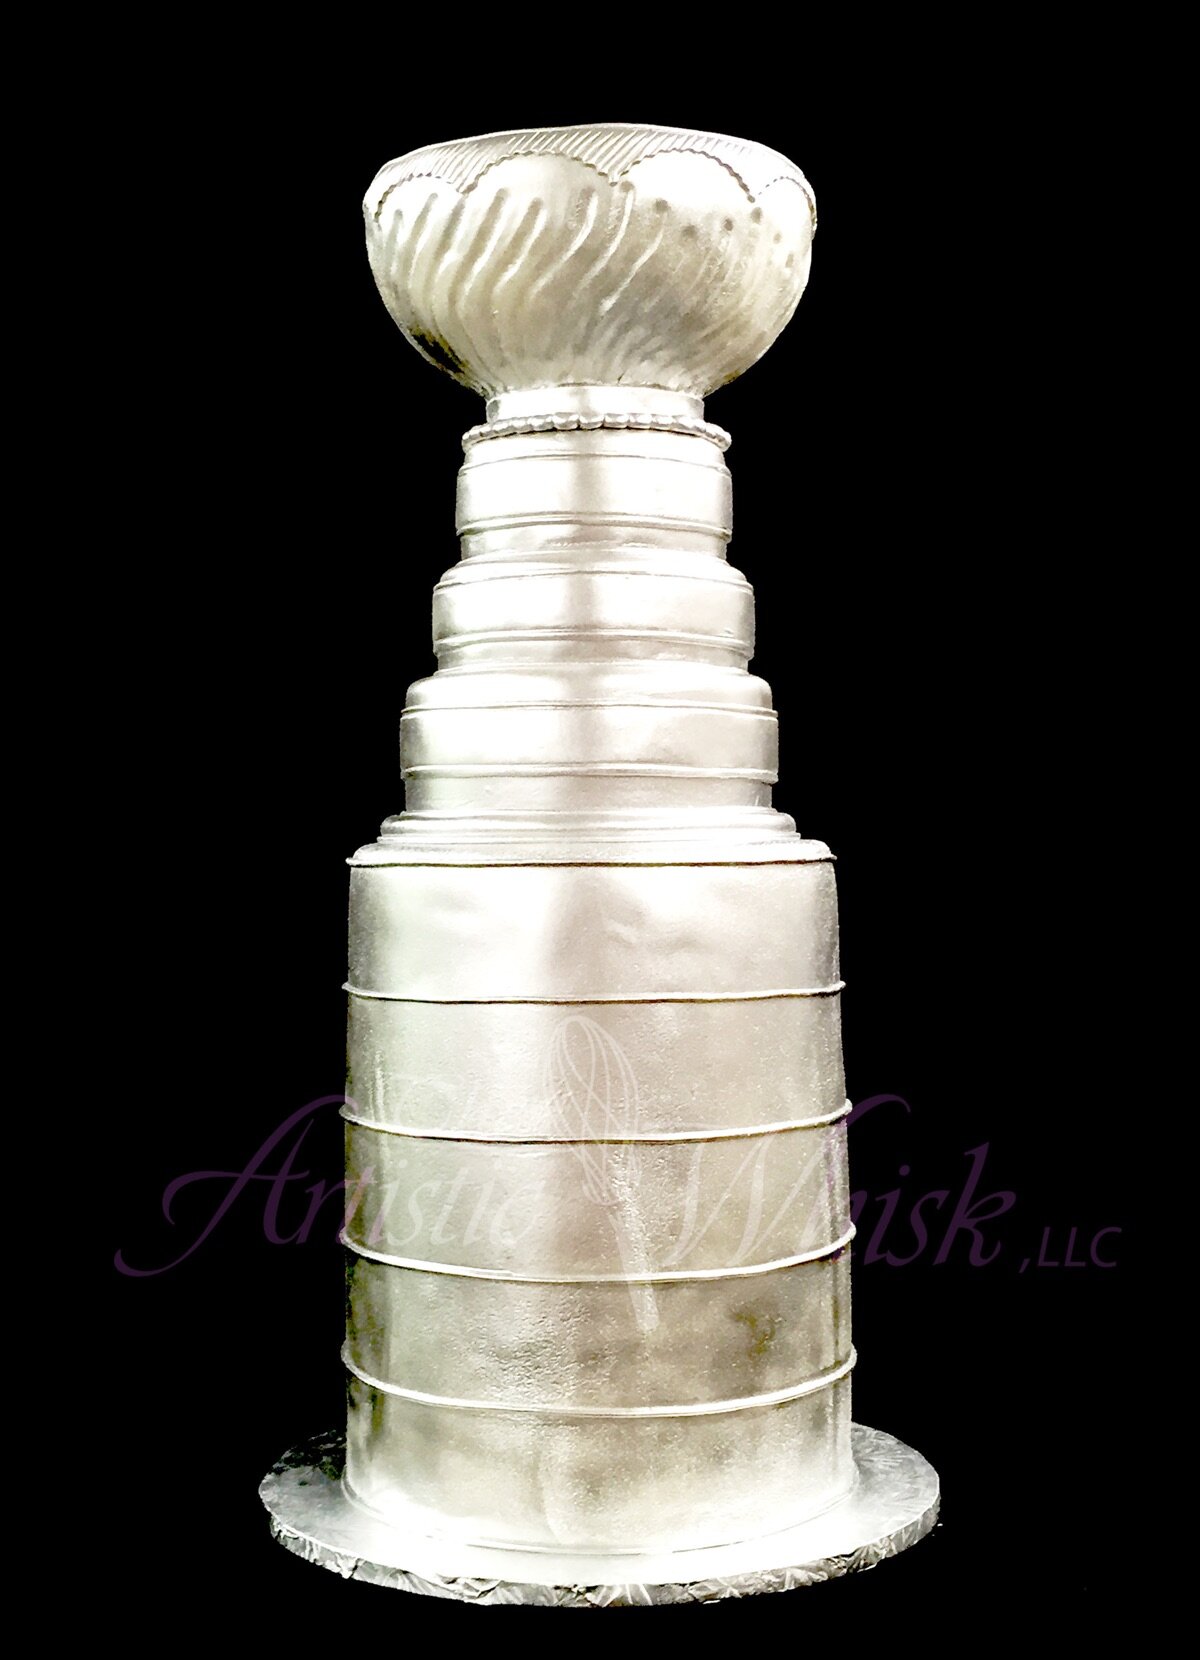 Stanley Cup - Celebration Cakes.jpg